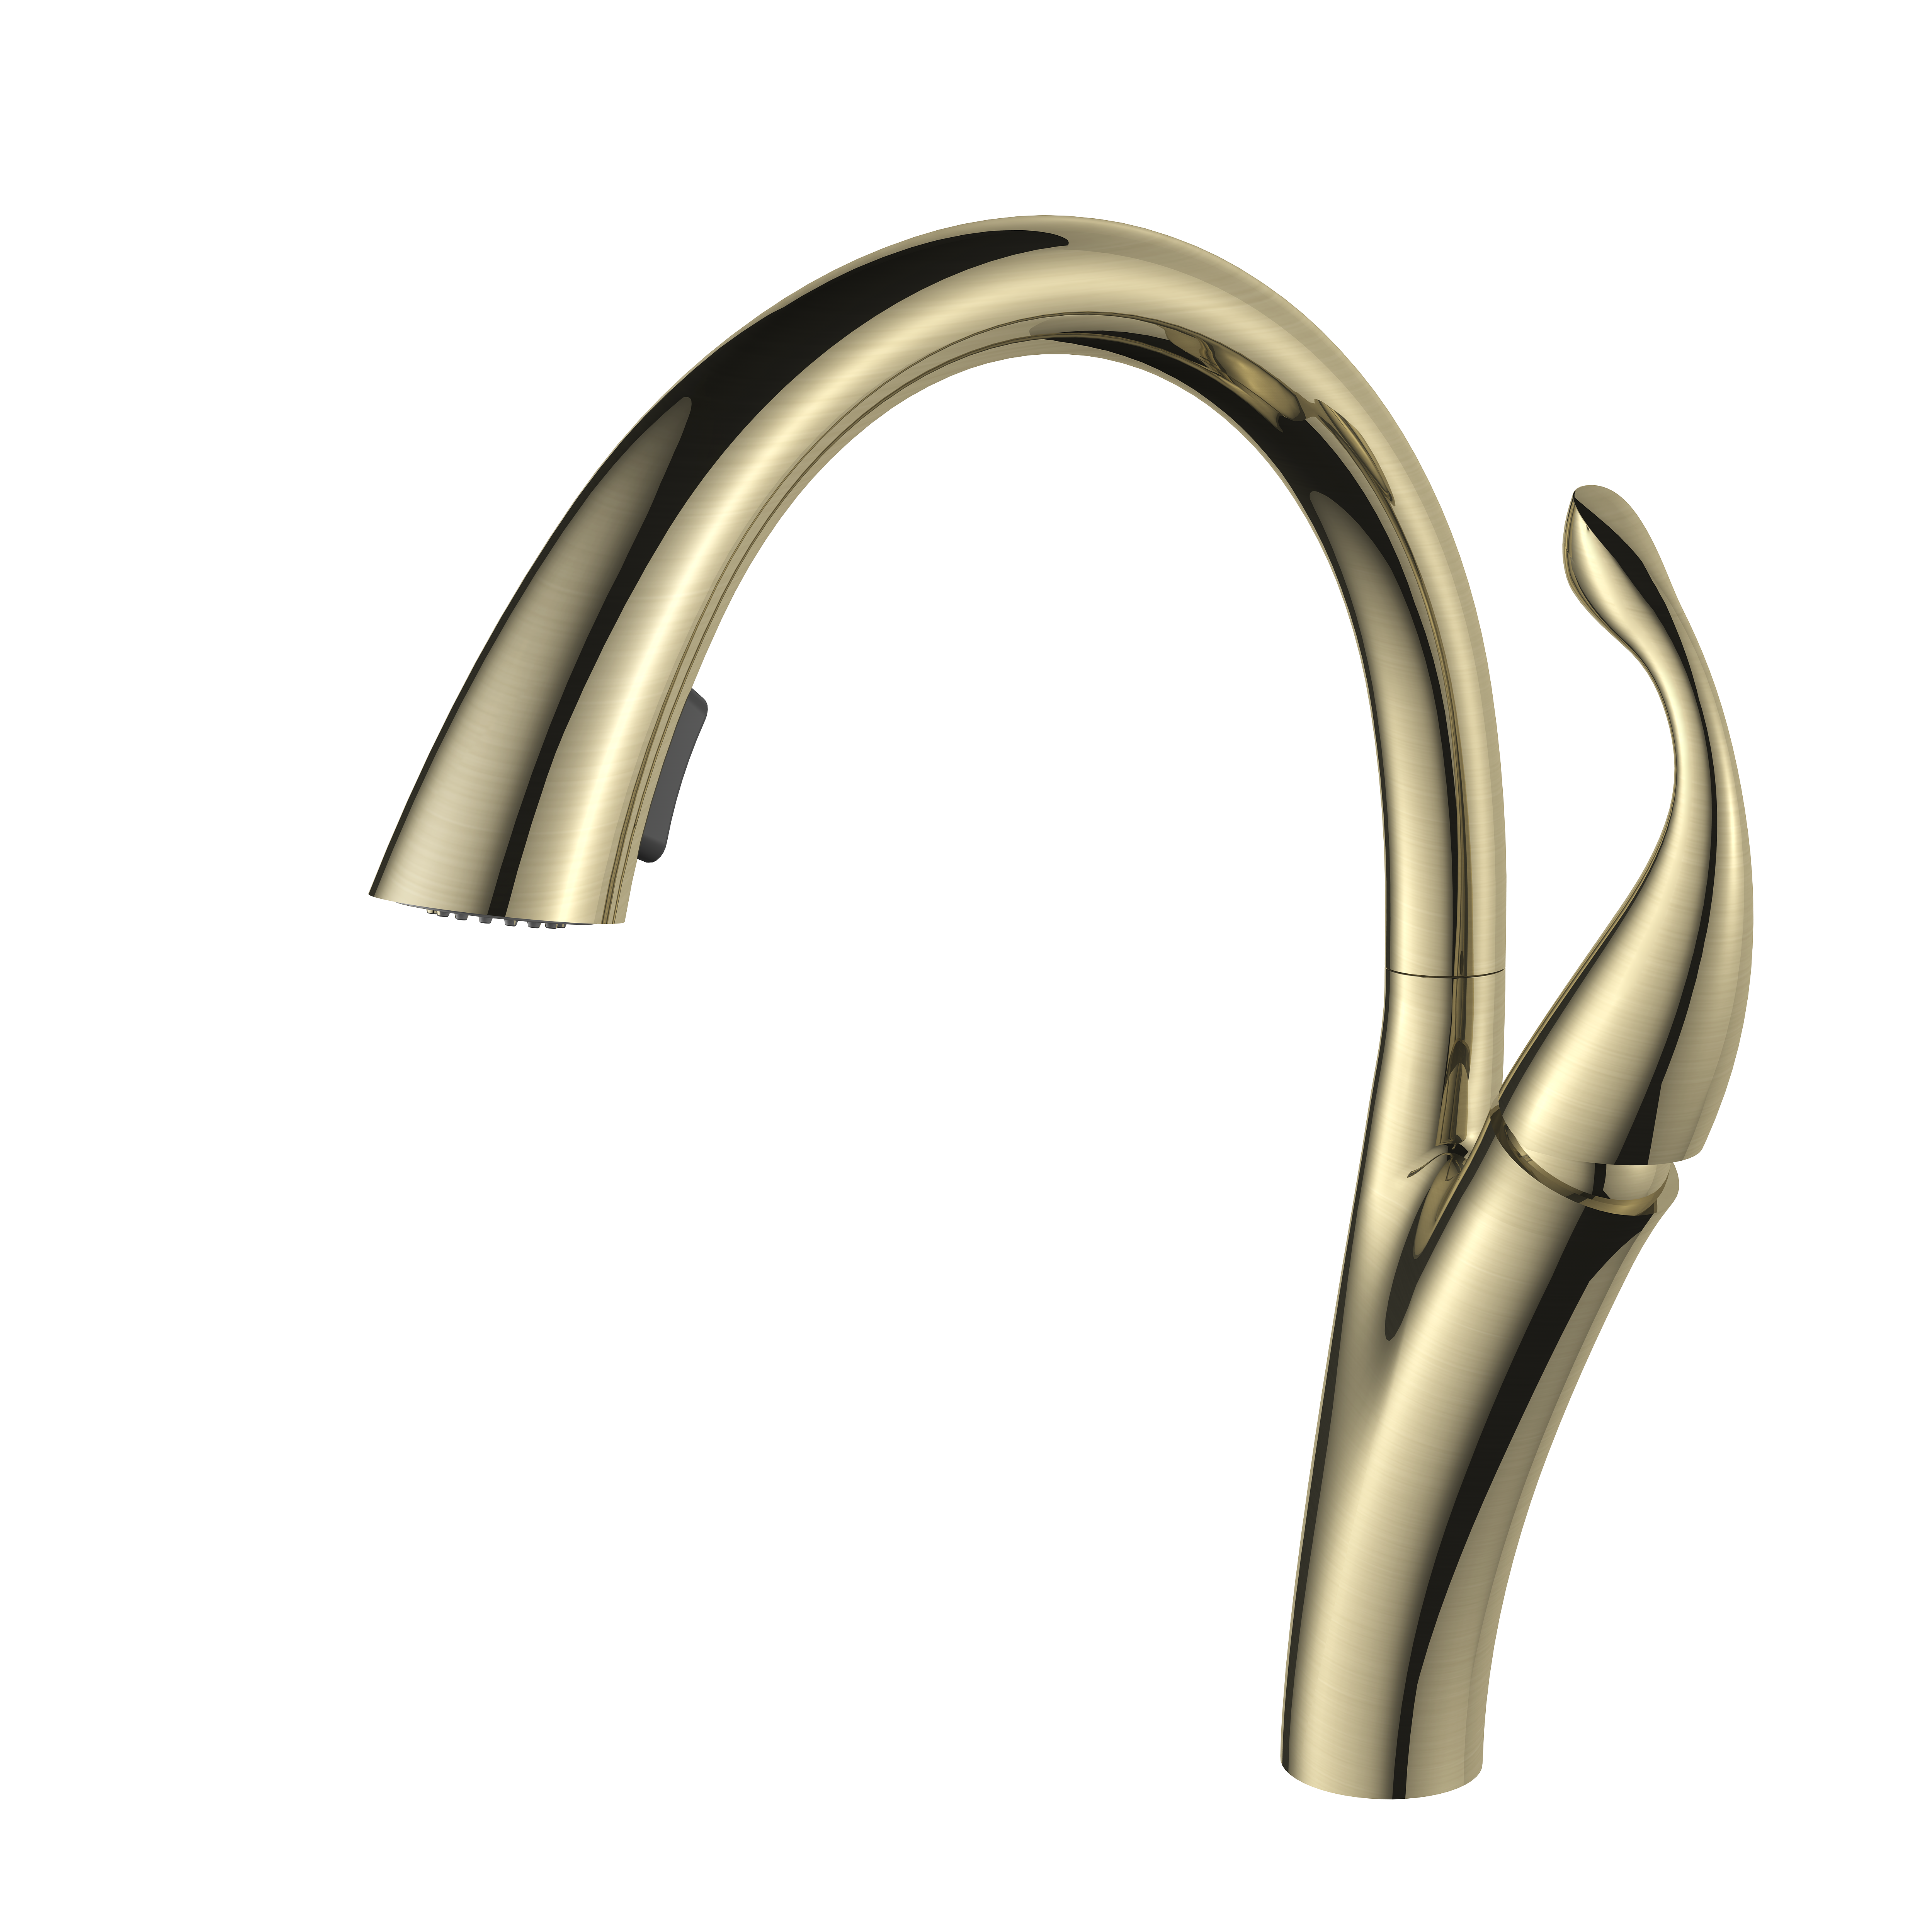 G01 Luxury Modern Design Single Lever Chrome Gold Price Water Pull Down Pull Out Kitchen Taps Sink Mixer Faucet